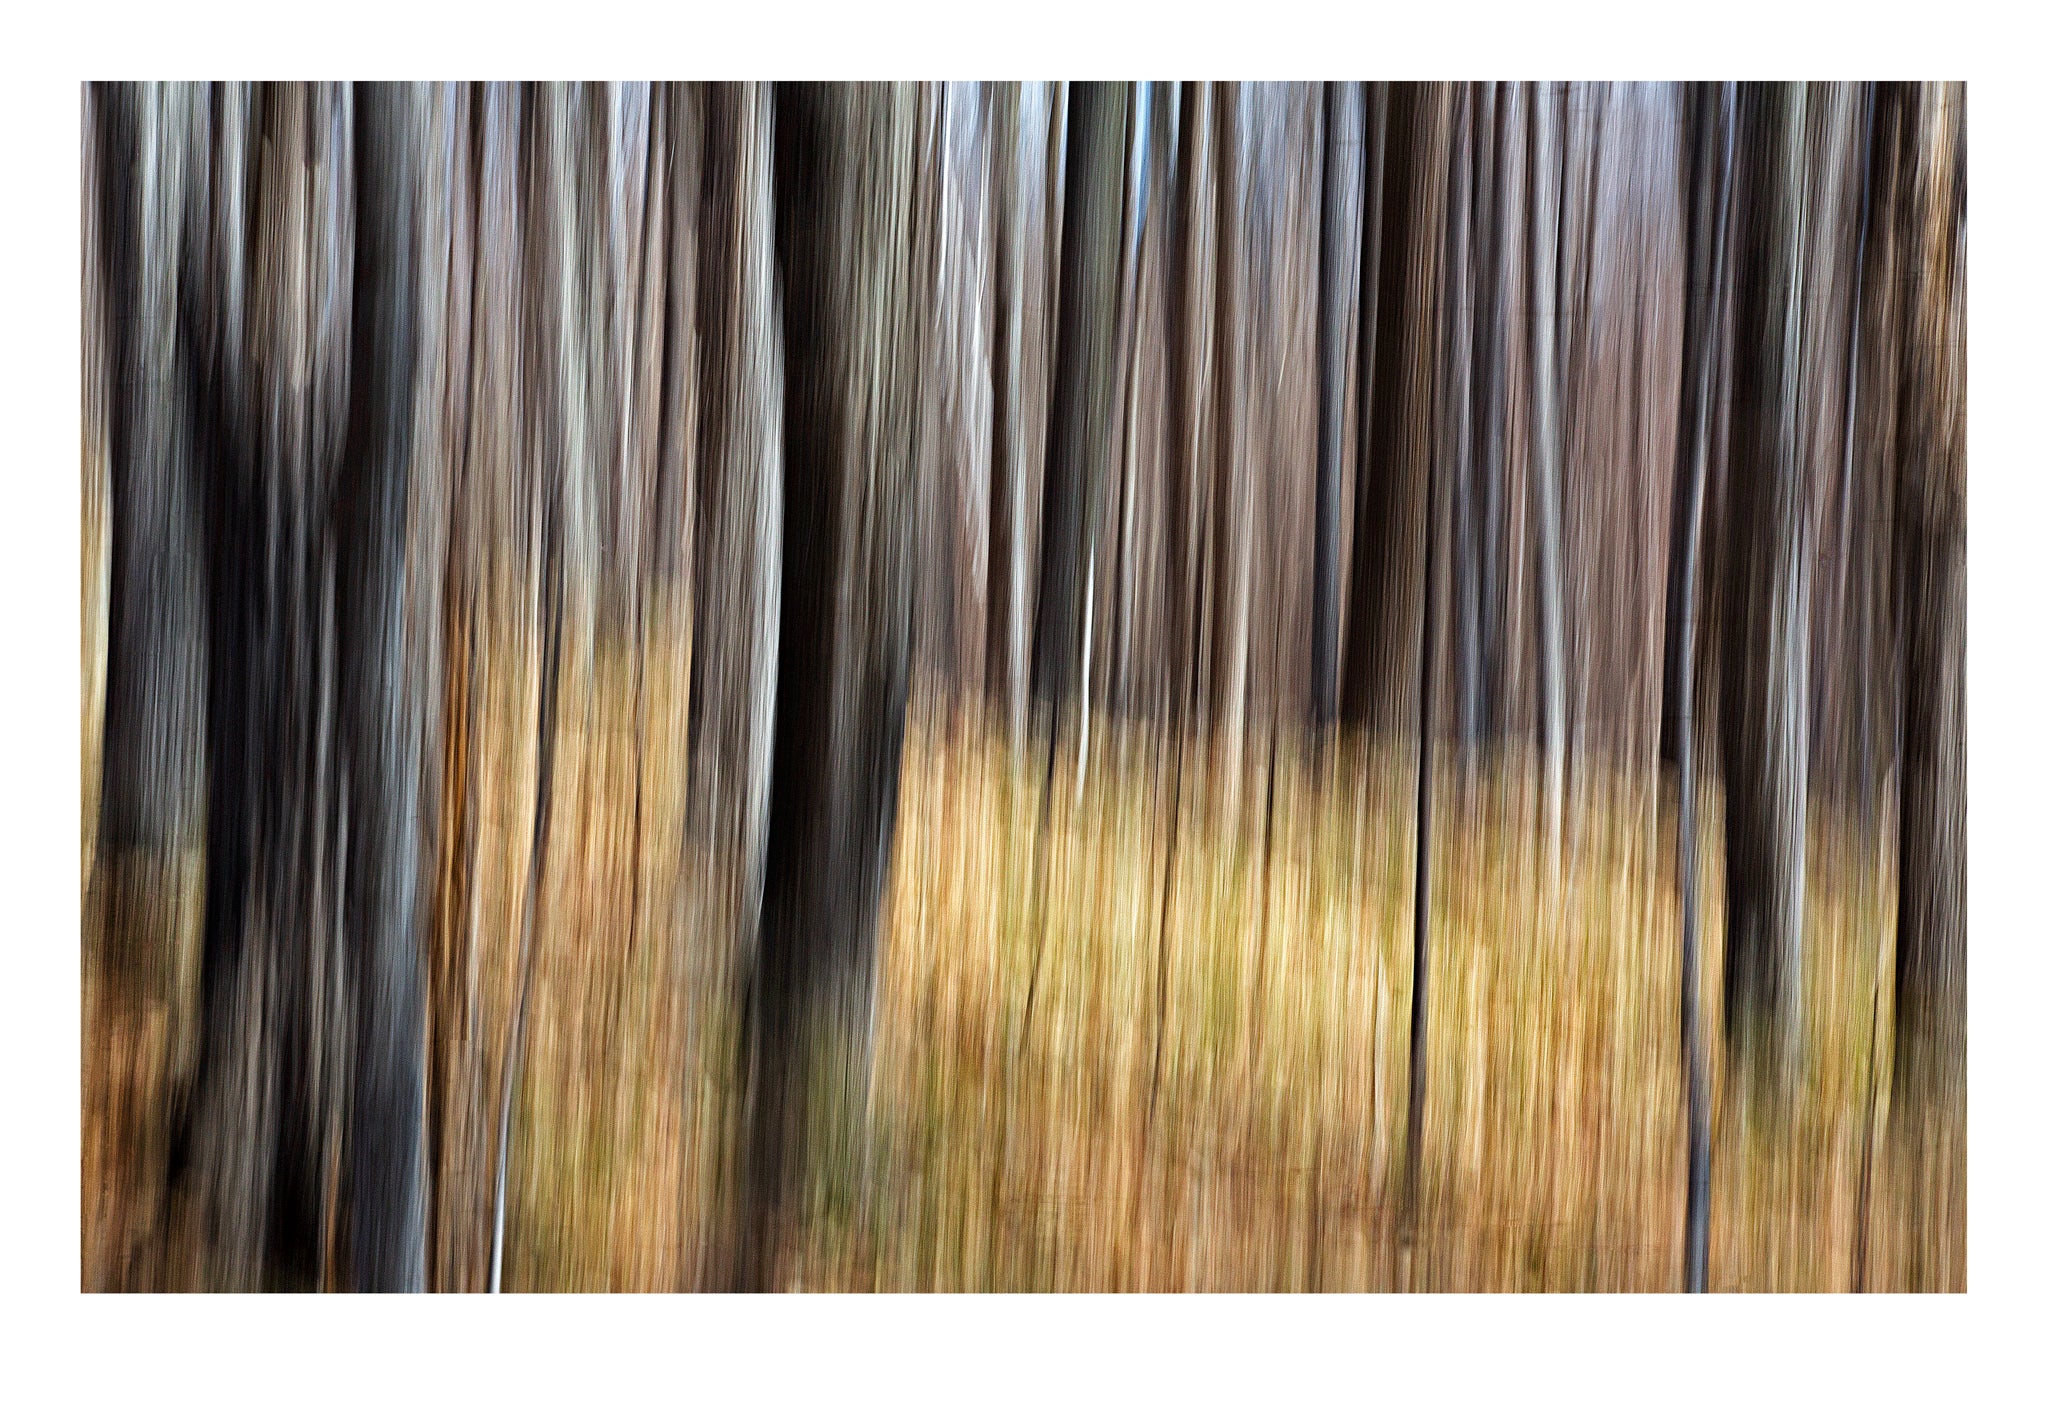 'The Forest' - Intentional Camera Movement